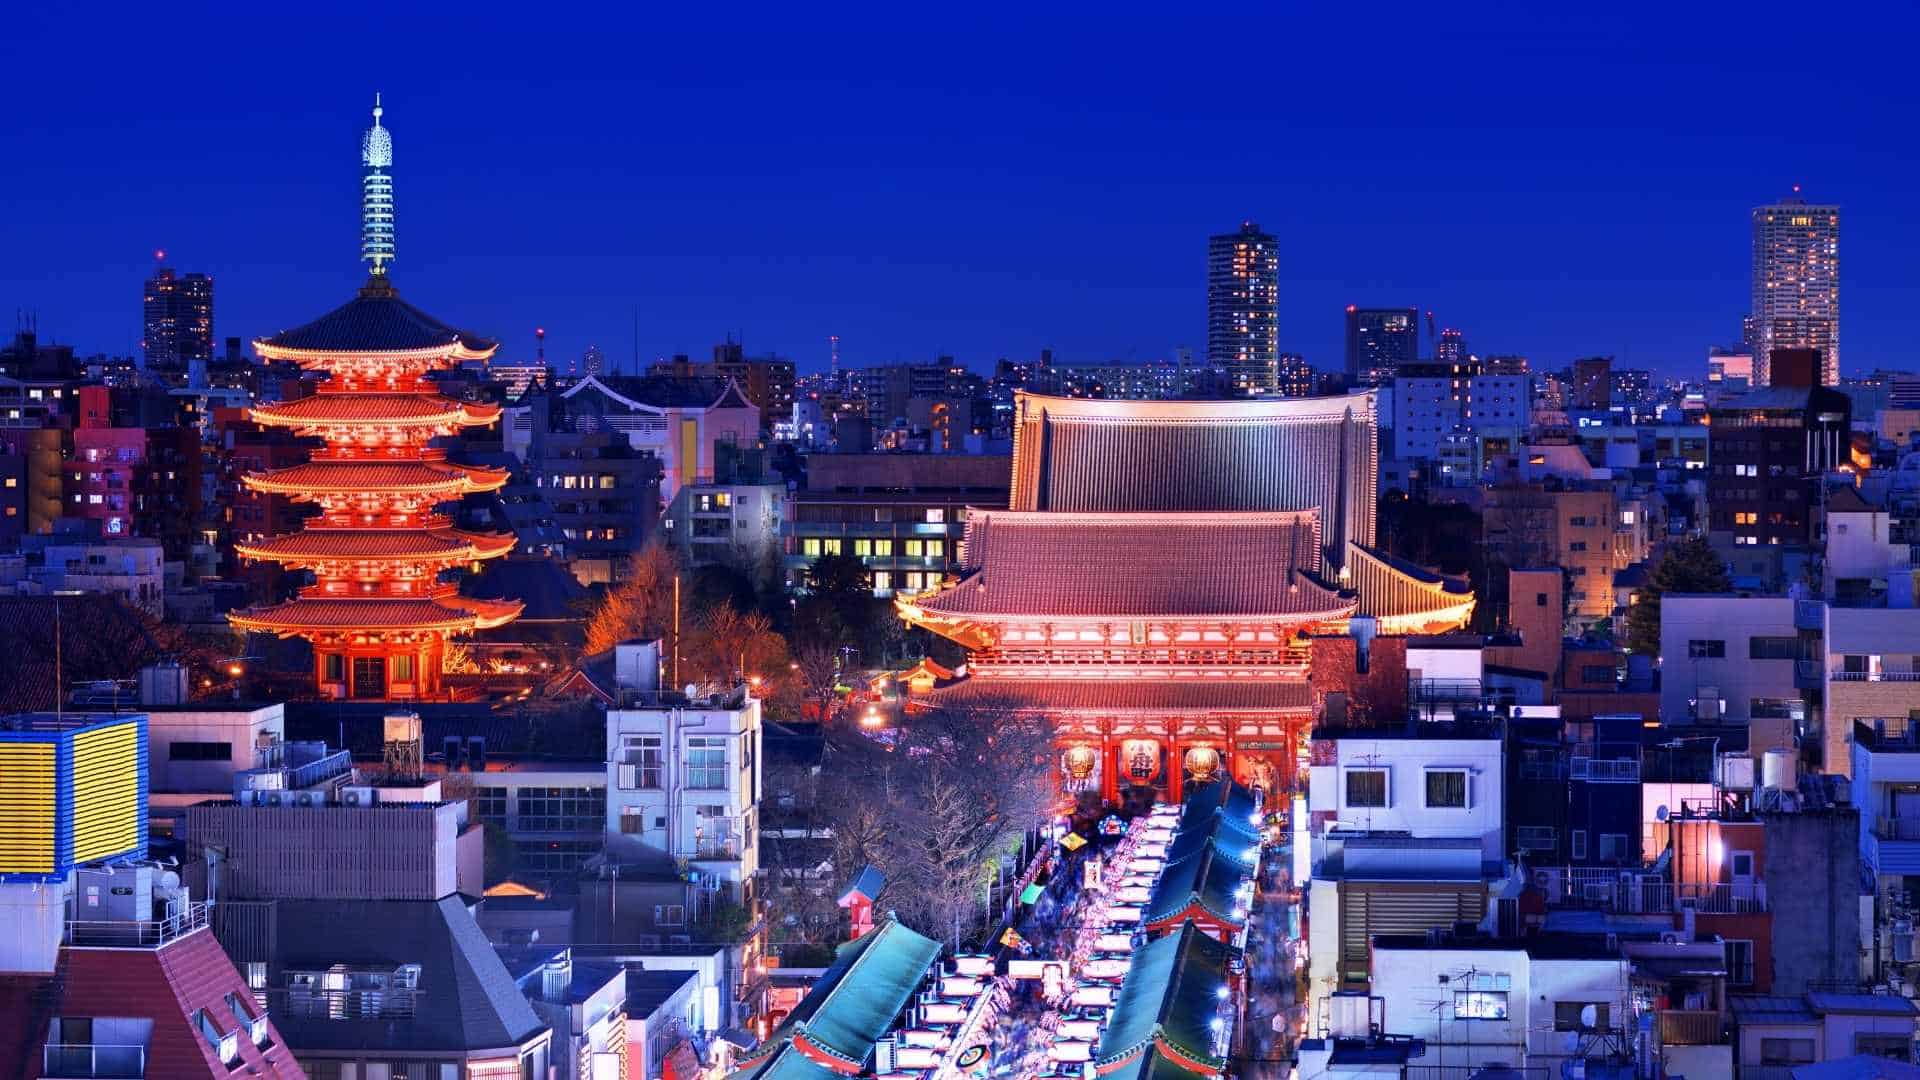 The unique nightlife in Traditional Asakusa